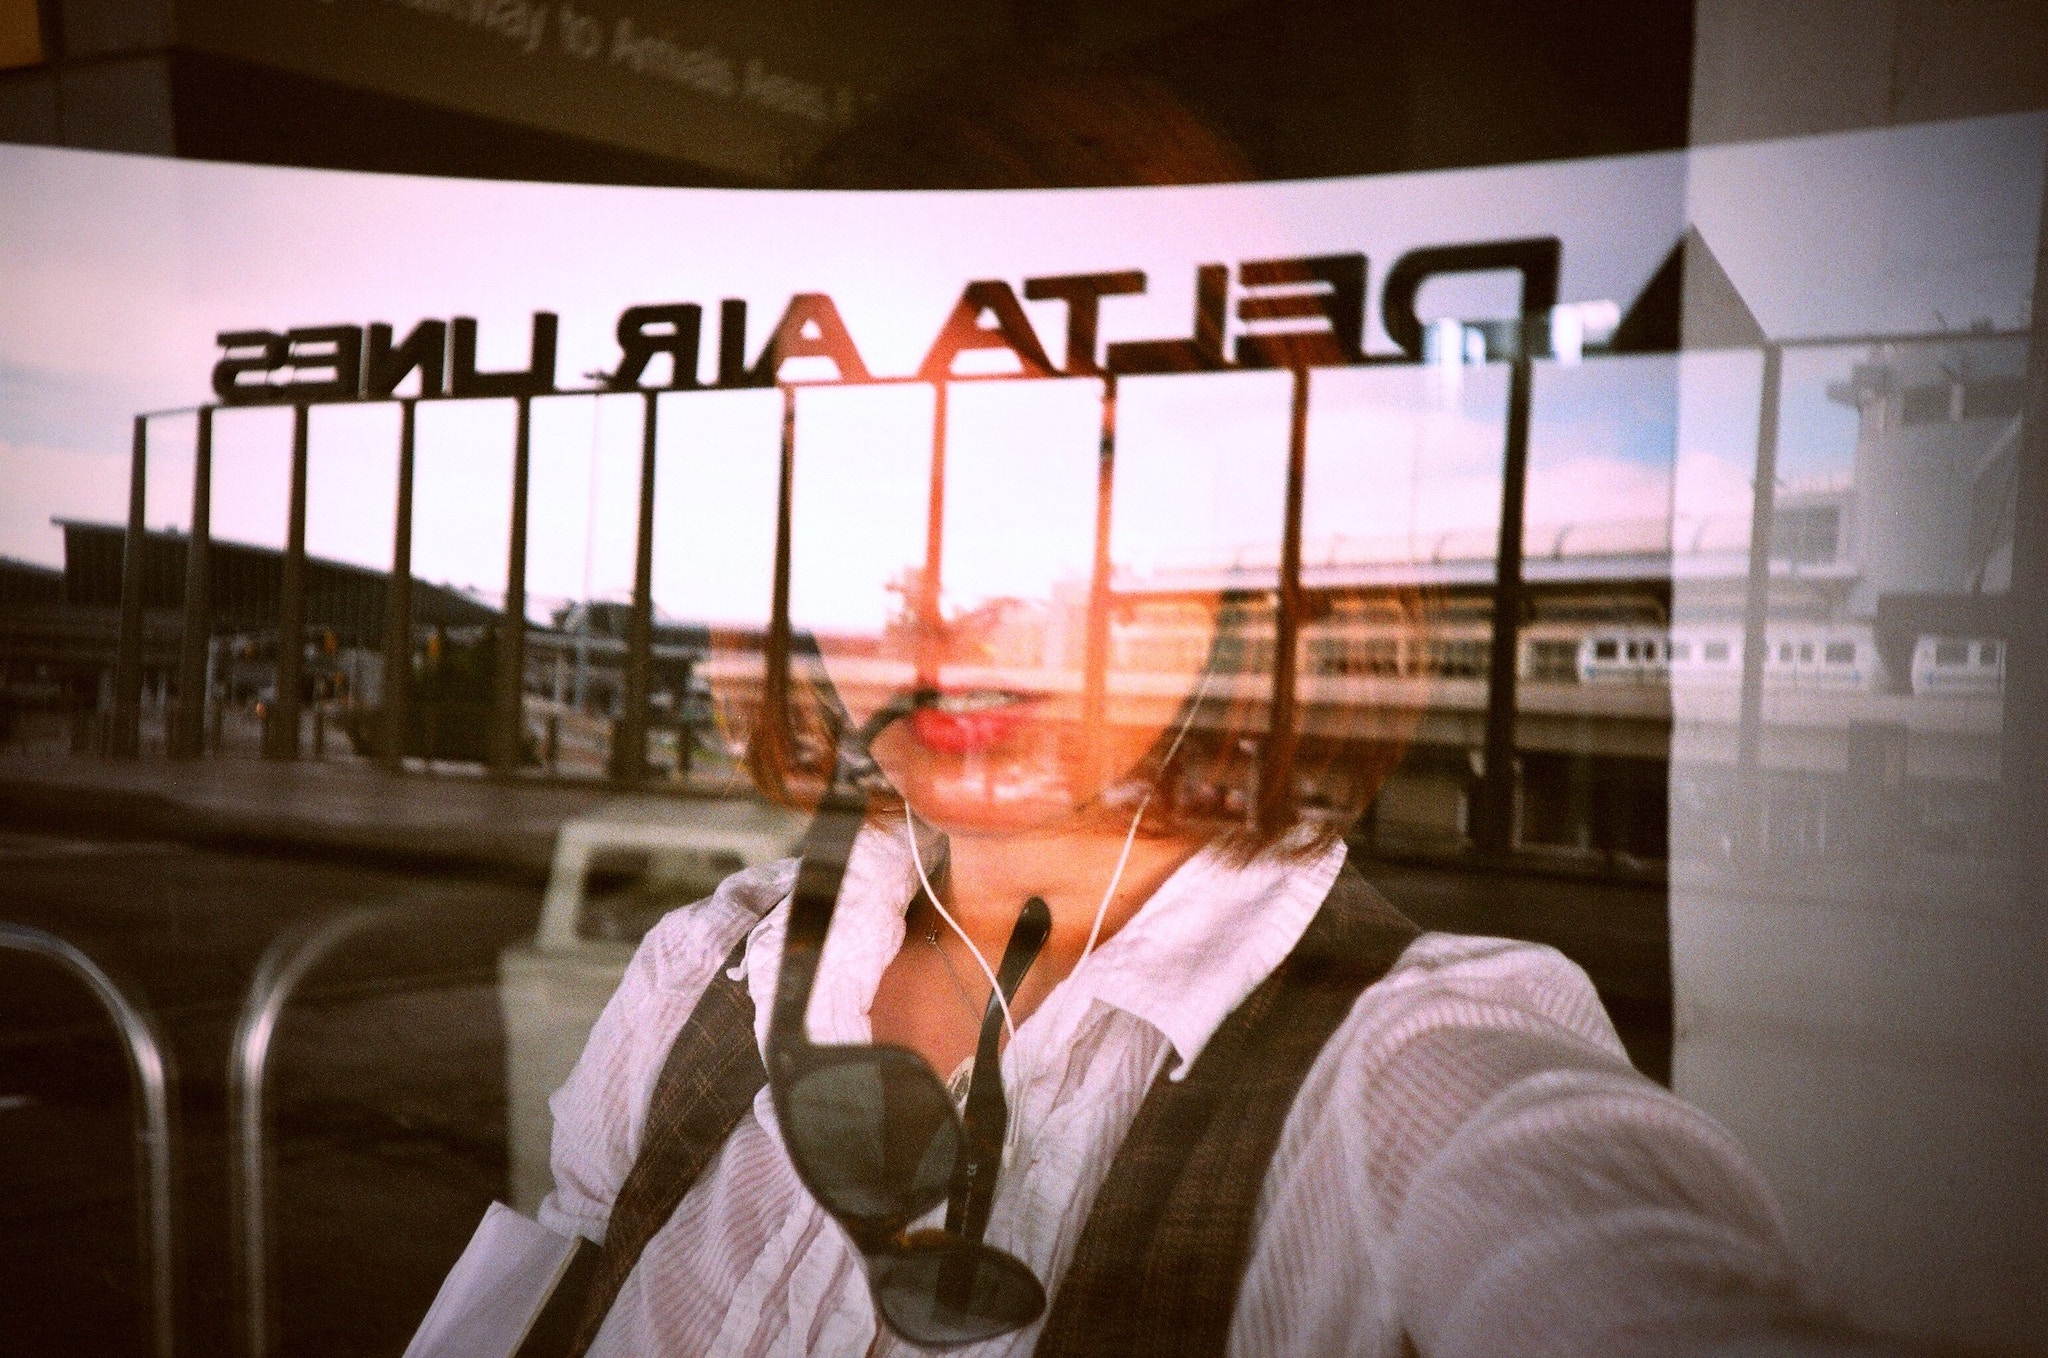 young female traveler looking out the window at an airport, the delta airlines sign visible in the reflection